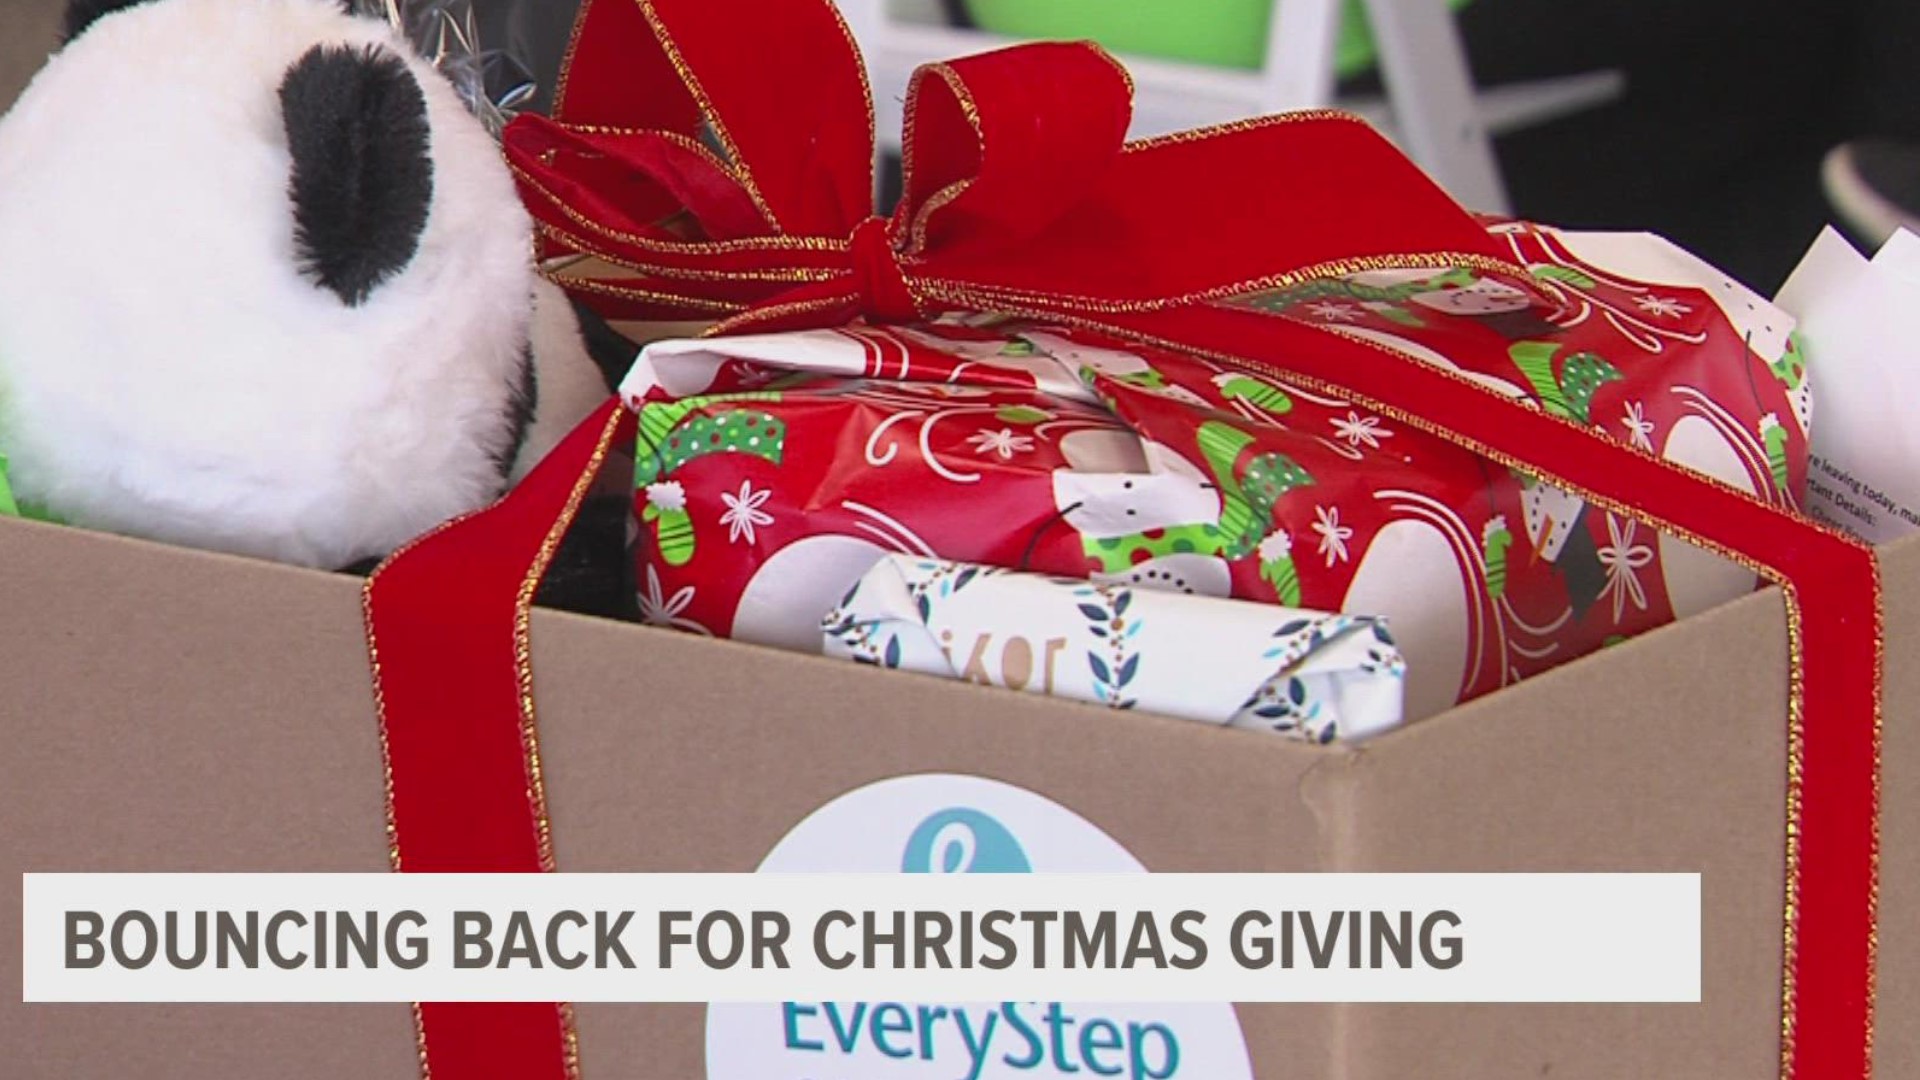 EveryStep prepares around 600 gifts for grieving community members every year. Monday night, around 50 of those gifts were stolen.